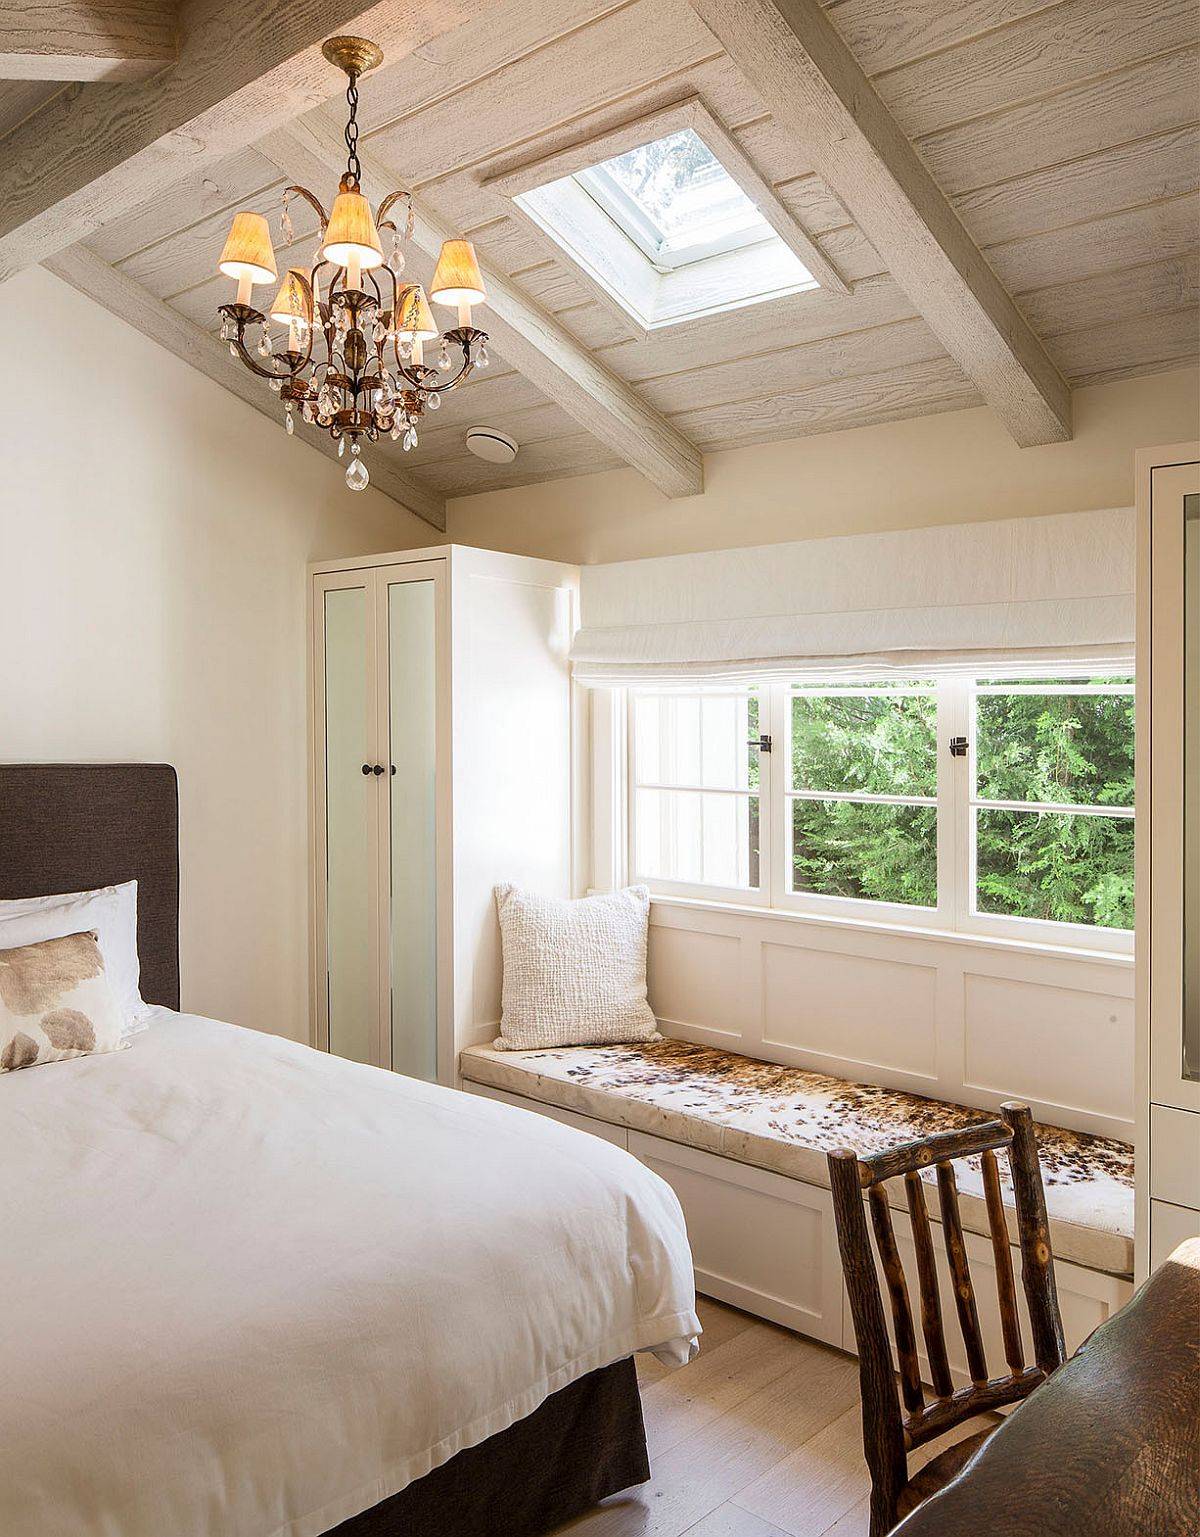 Small-skylight-and-a-lovely-bay-window-connect-this-bedroom-with-the-view-outside-while-ushering-in-ample-natural-light-99420